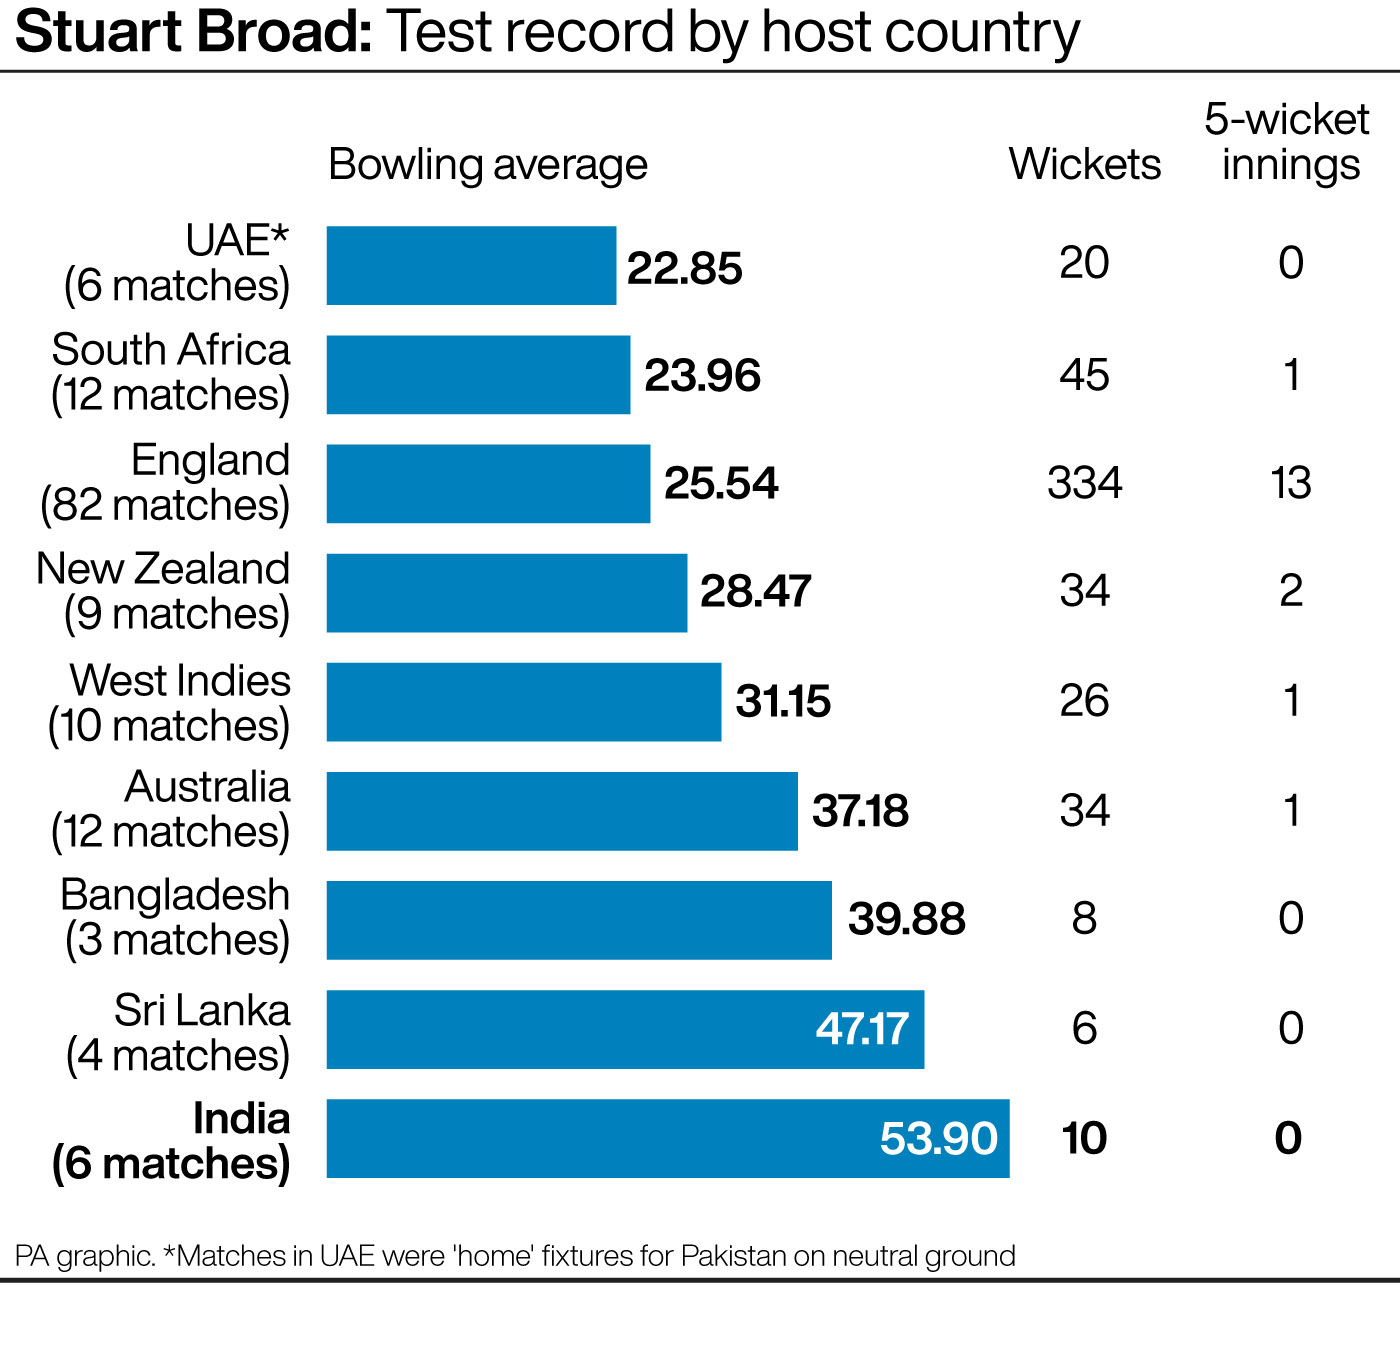 Stuart Broad: Test bowling record by host country